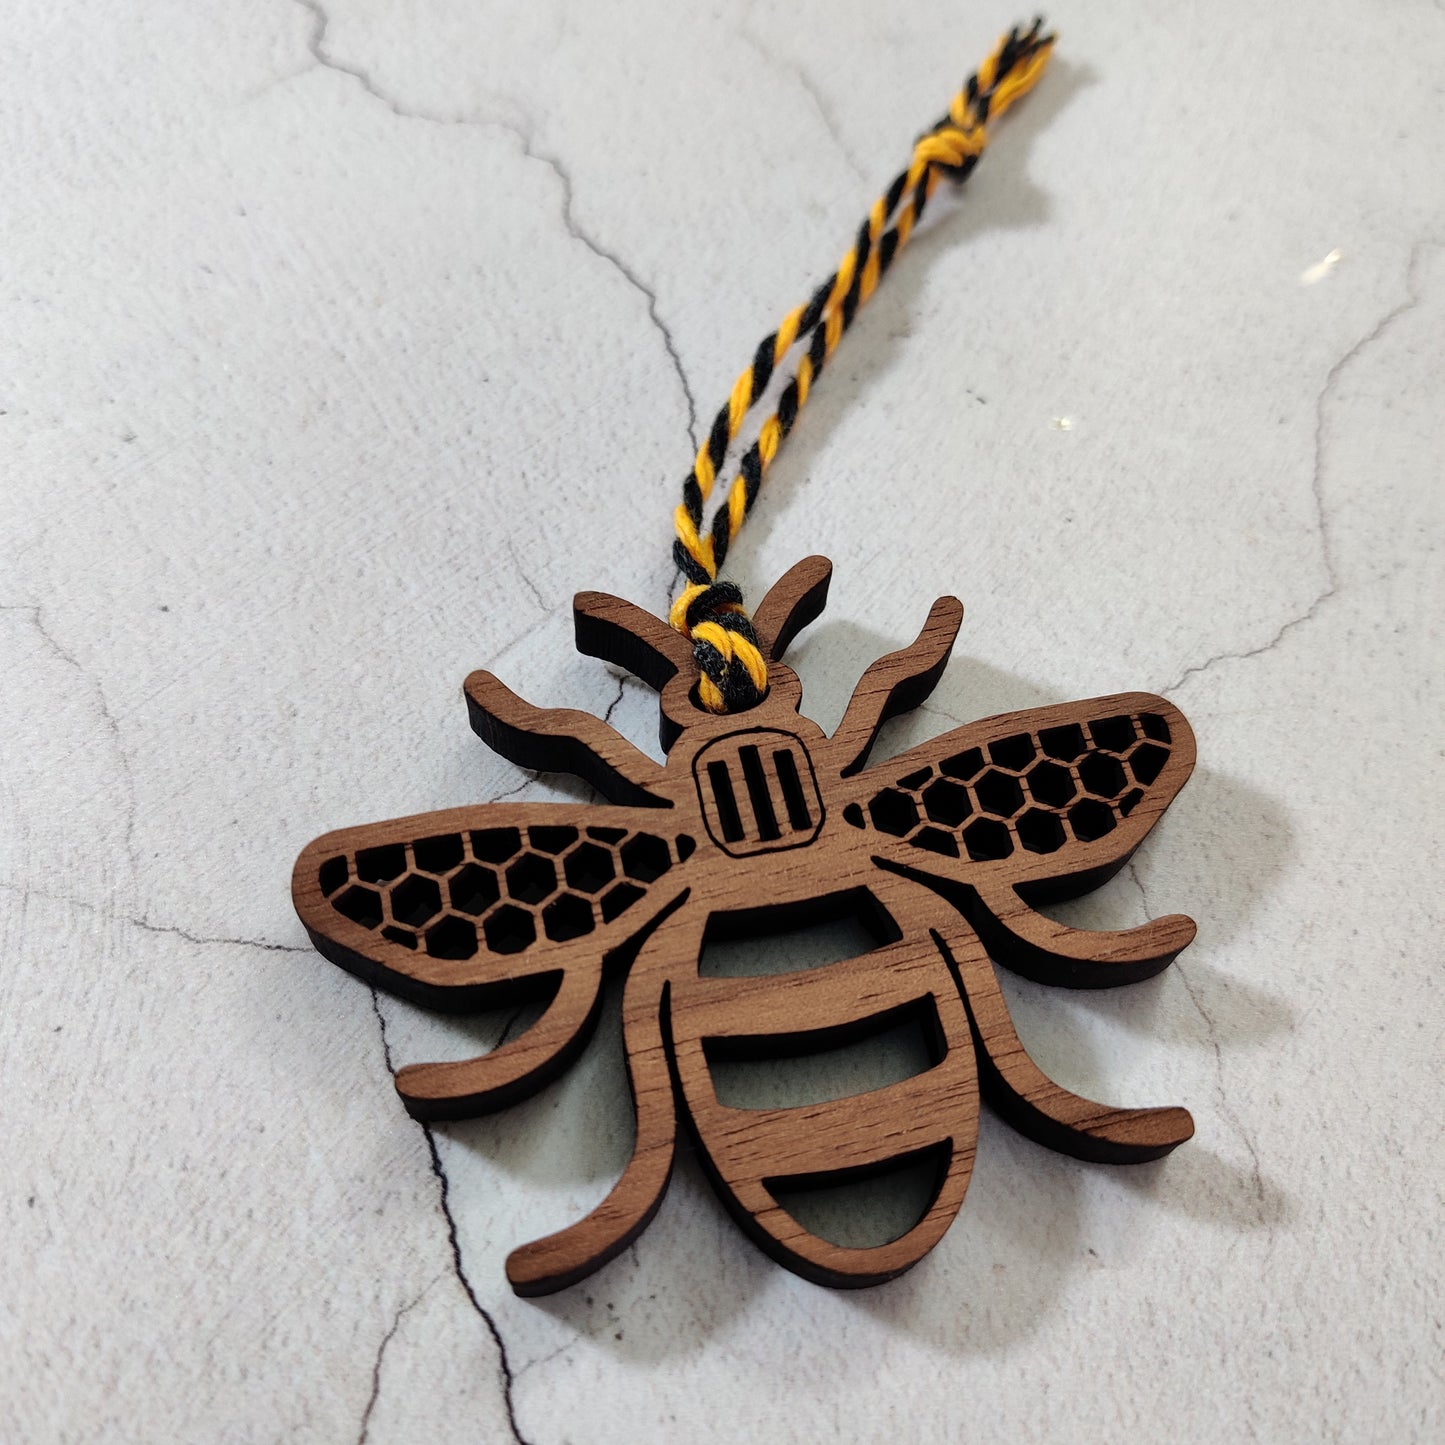 Manchester Bee Christmas Decoration - real wood - Mancunian - stocking filler